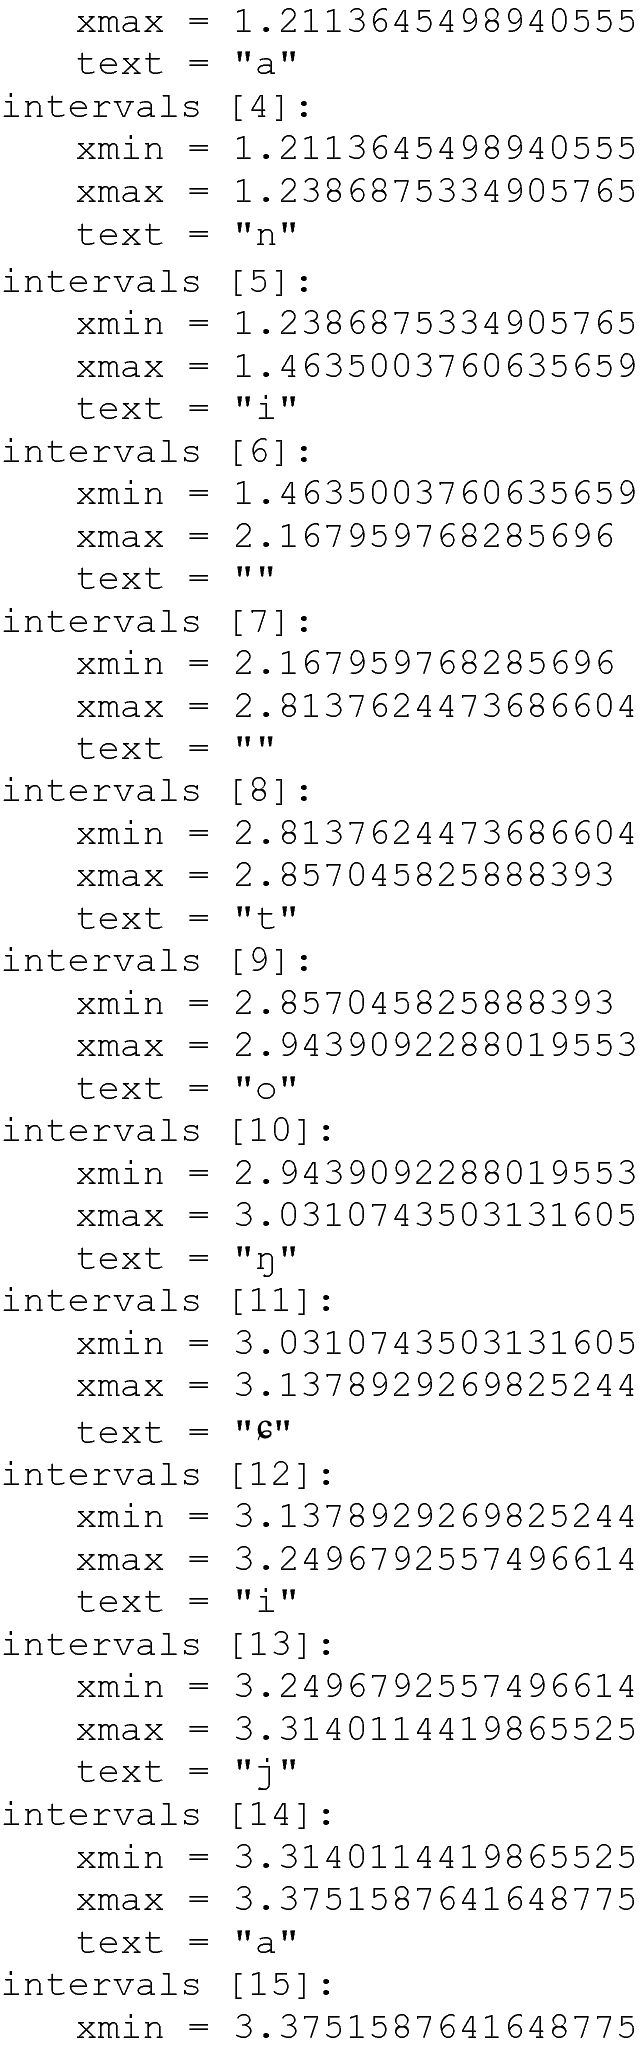 A set of program codes defines several intervals with values of x min, x max, and text as single alphabets.